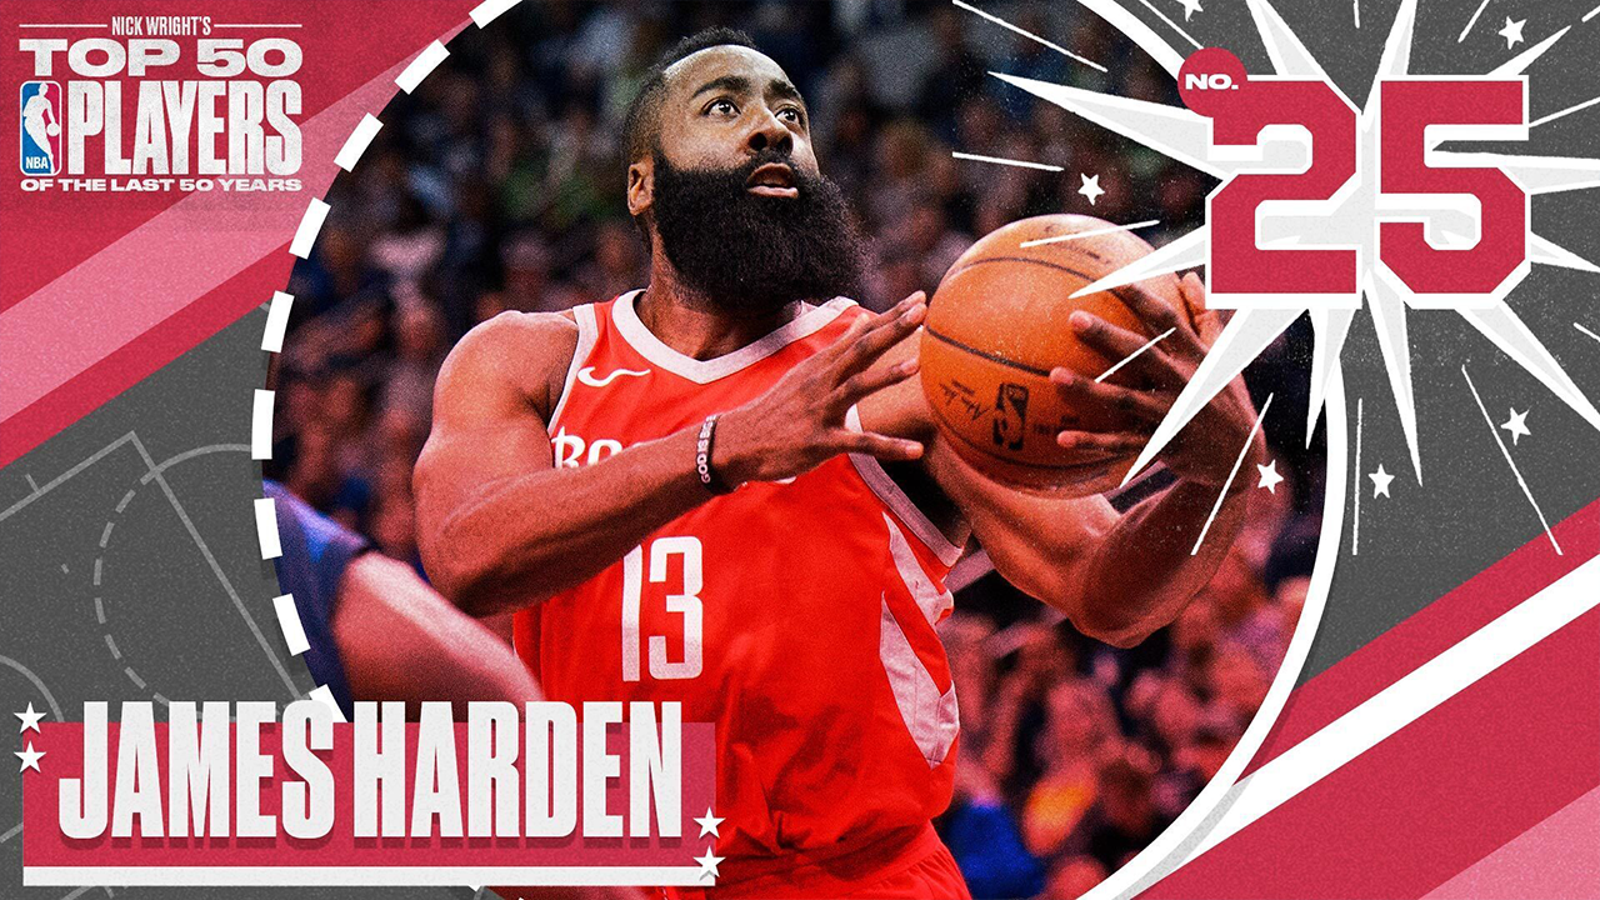 Beryl TV play-5ac19db4800123a--james_harden James Harden reckons with his legacy, and how Joel Embiid is key Sports 